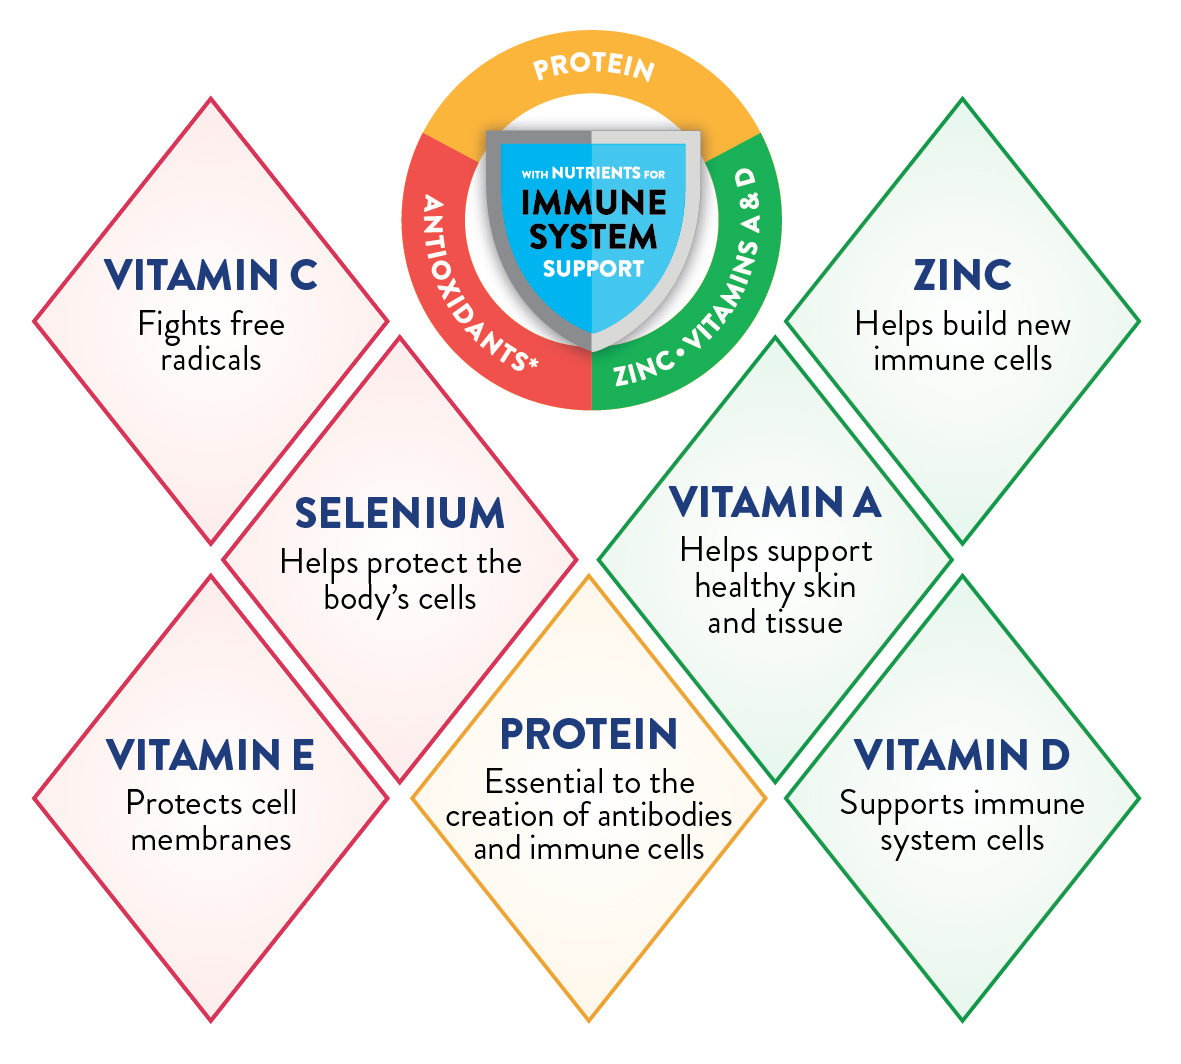 Key Nutrients for Immune System Support